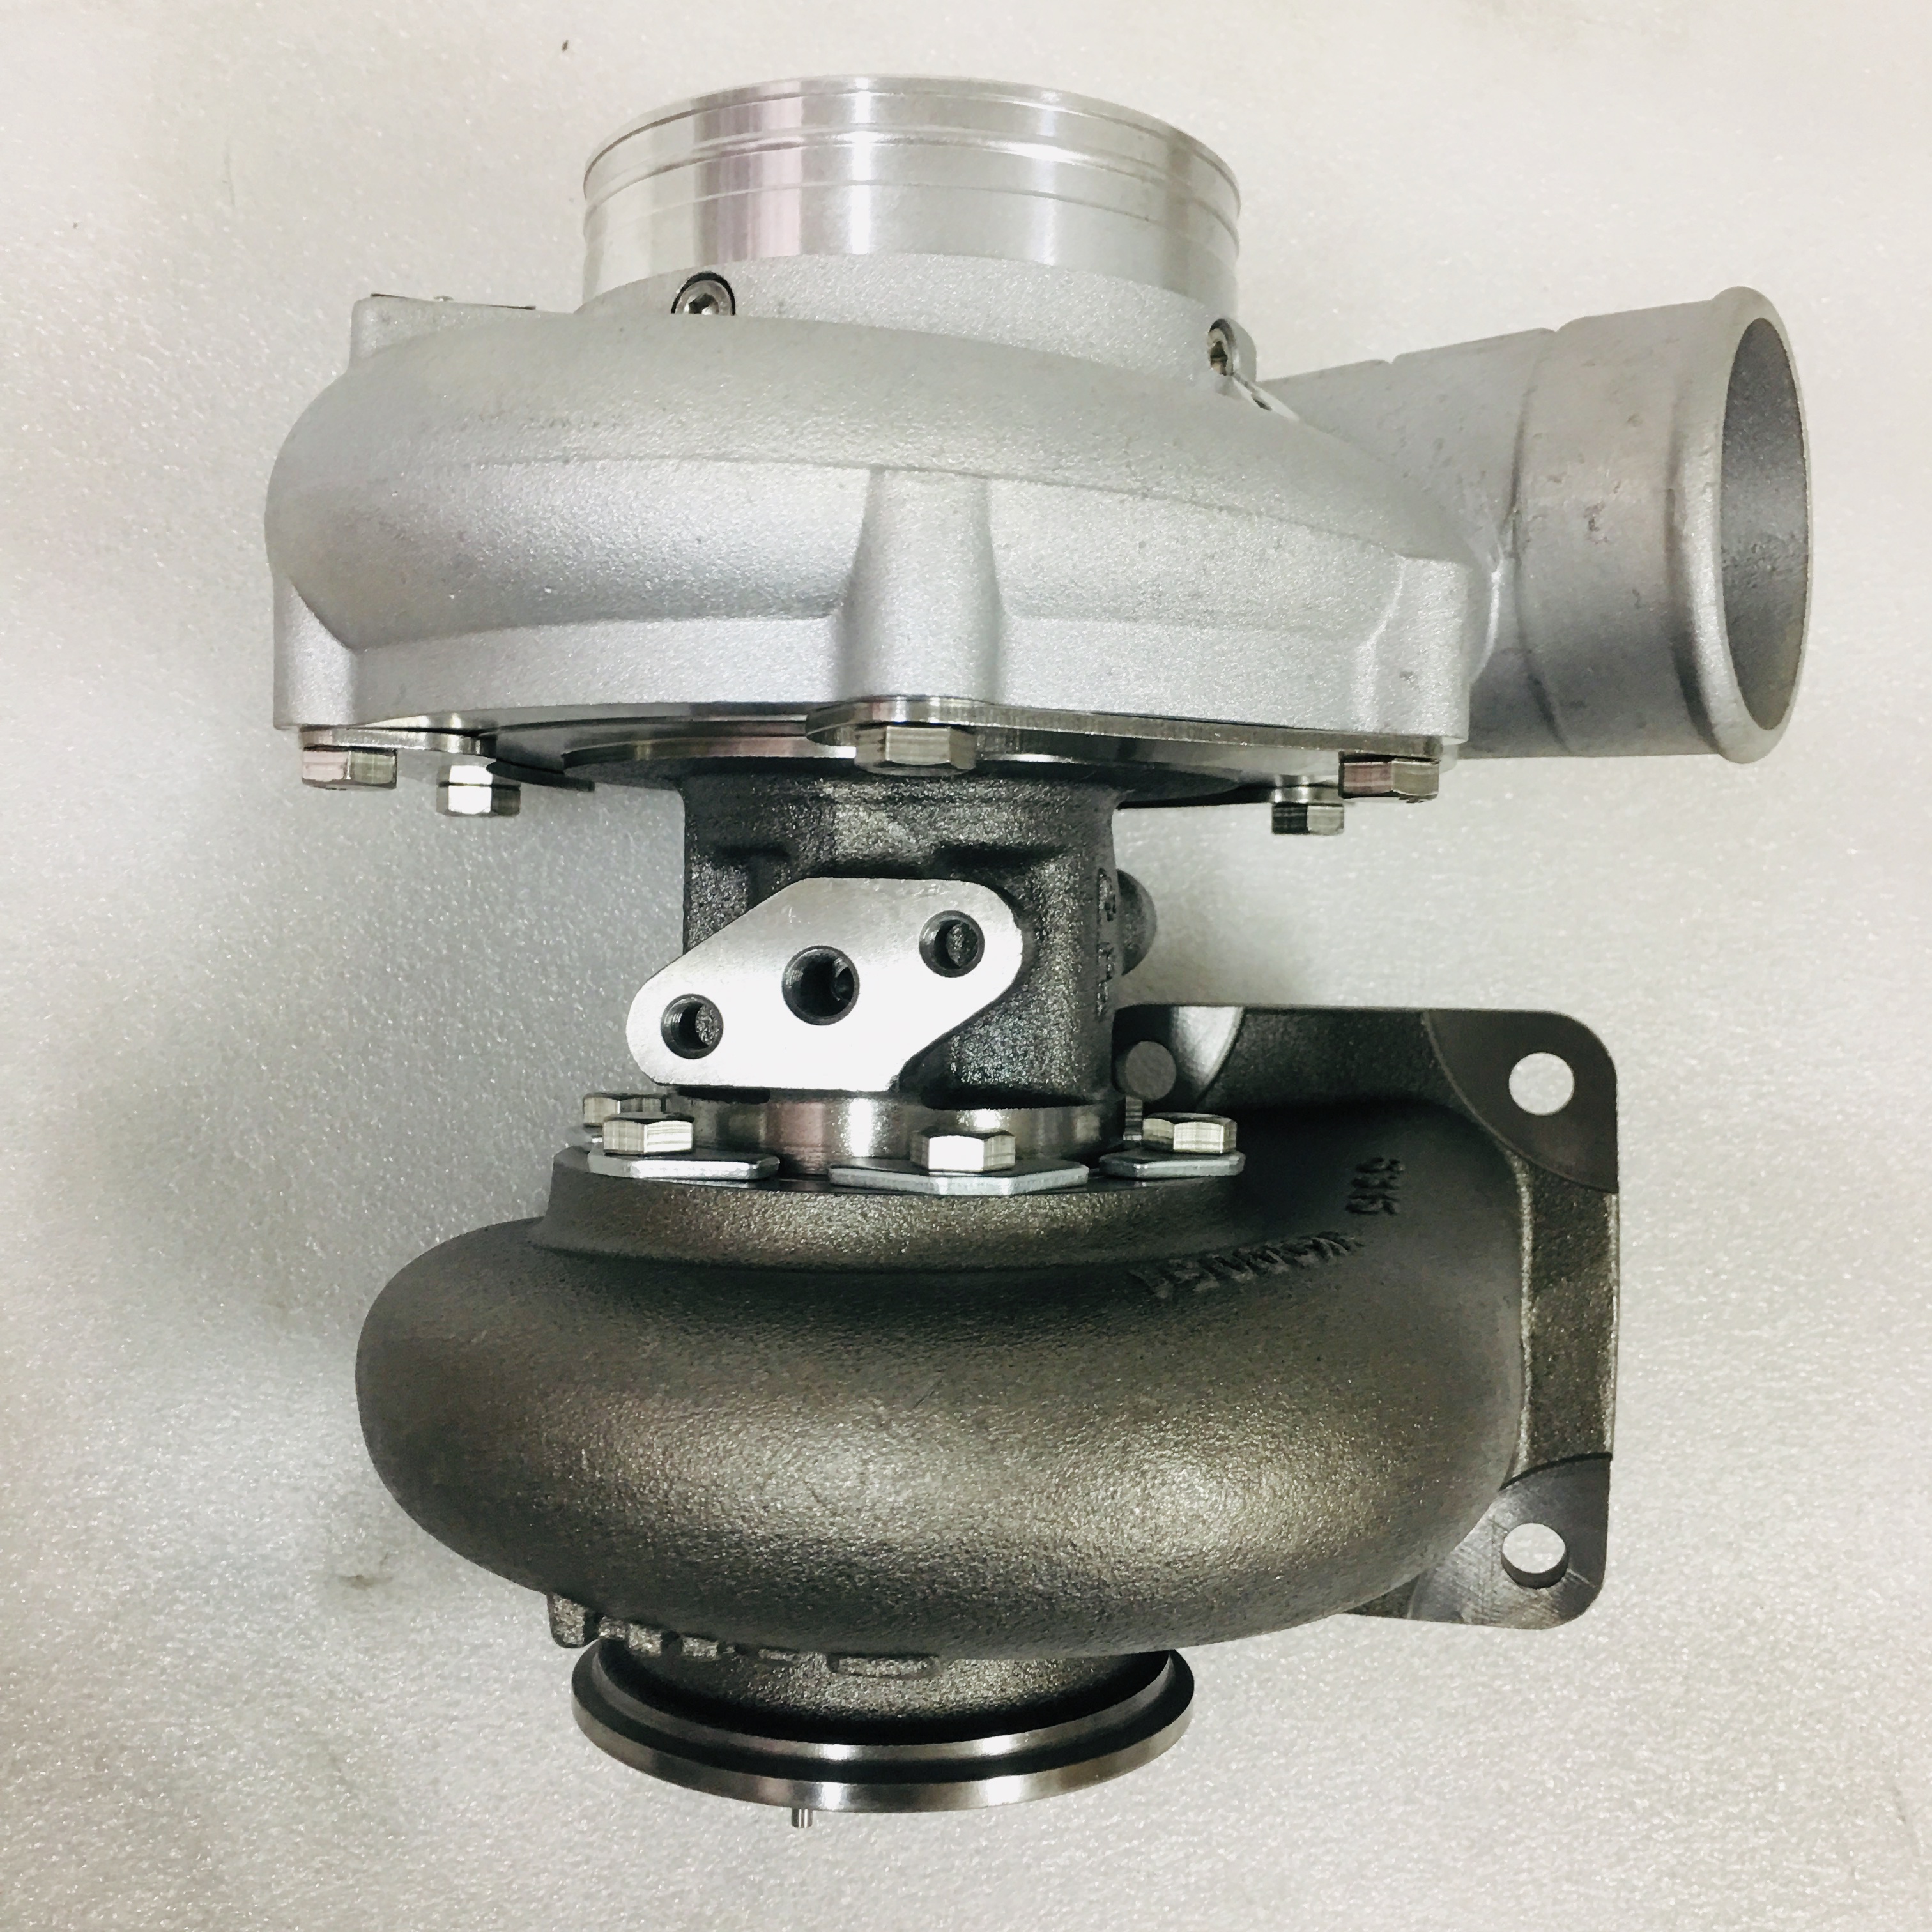 Special turbocharger for retrofitting and upgrading HKS air-cooled ball bearing to improve performance